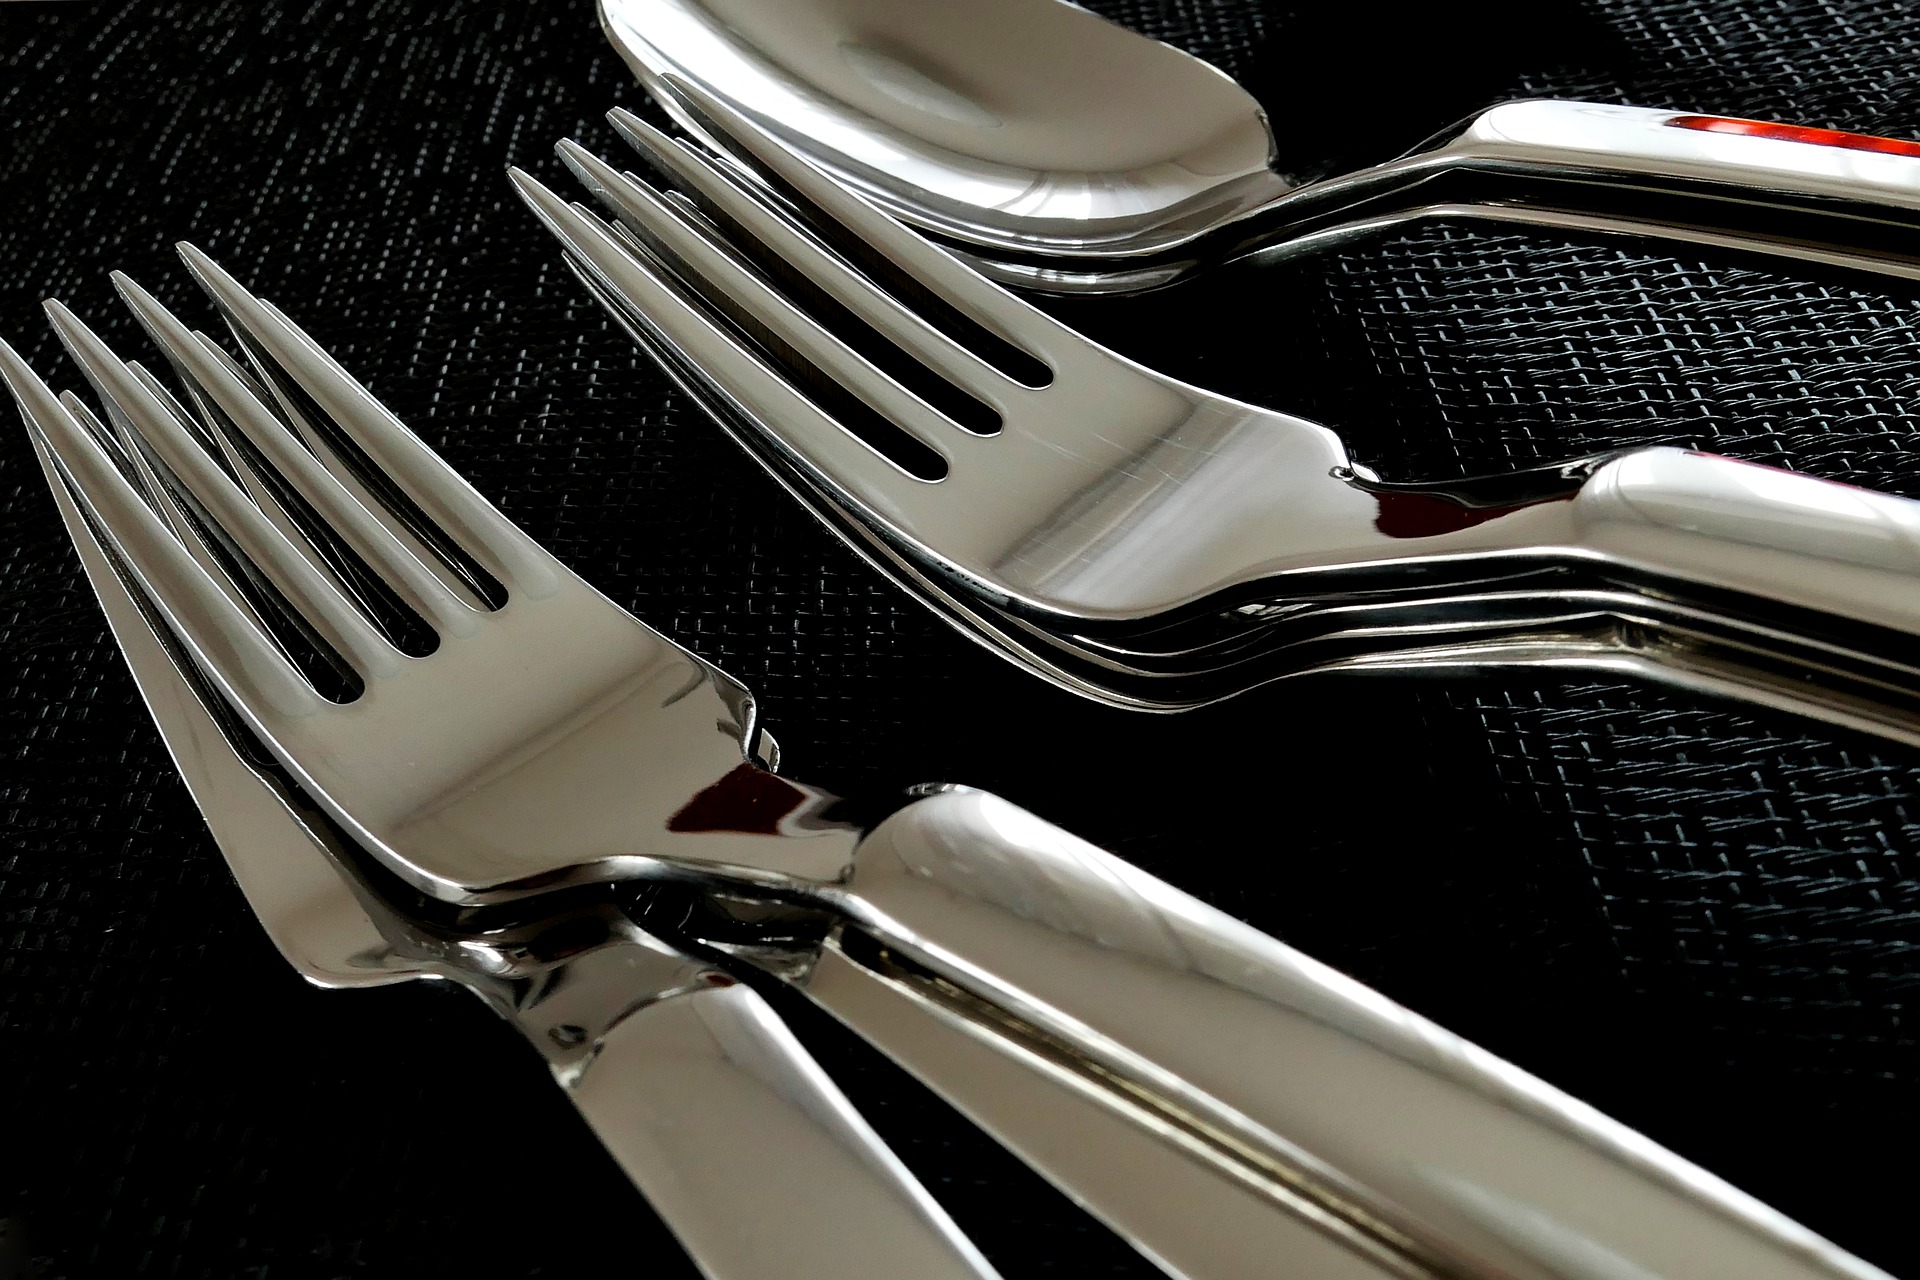 Modern Flatware Sets to Add Some Ambiance to Your Meals